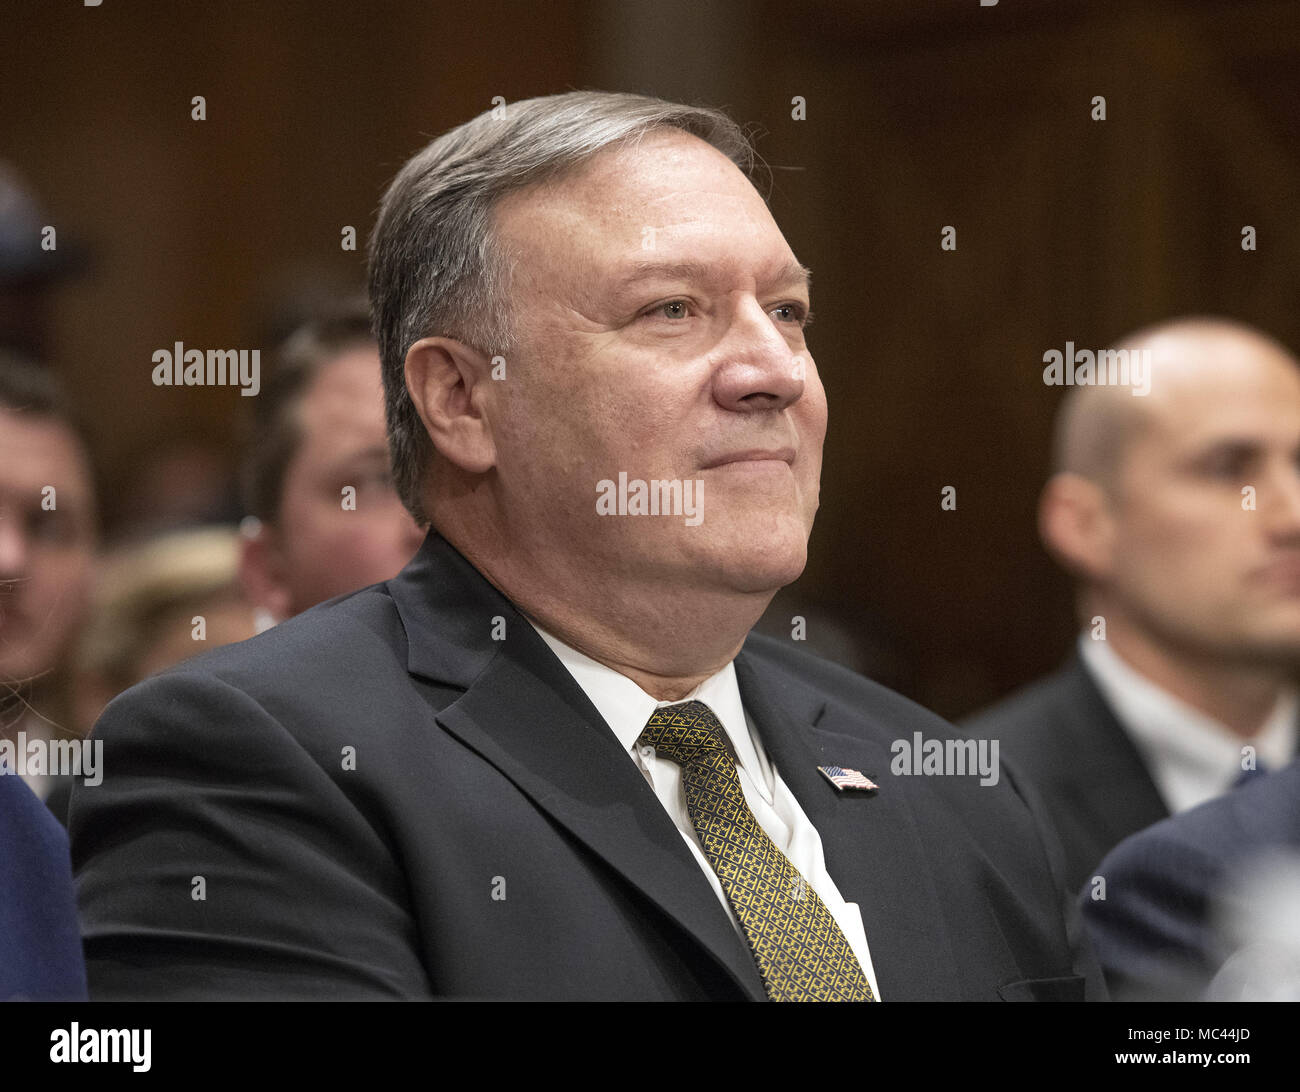 Washington, District of Columbia, USA. 12th Apr, 2018. CIA Director Mike Pompeo waits for his opportunity to testify on his nomination to be United States Secretary of State before the US Senate Committee on Foreign Relations on Capitol Hill in Washington, DC on Thursday, April 12, 2018.Credit: Ron Sachs/CNP Credit: Ron Sachs/CNP/ZUMA Wire/Alamy Live News Stock Photo